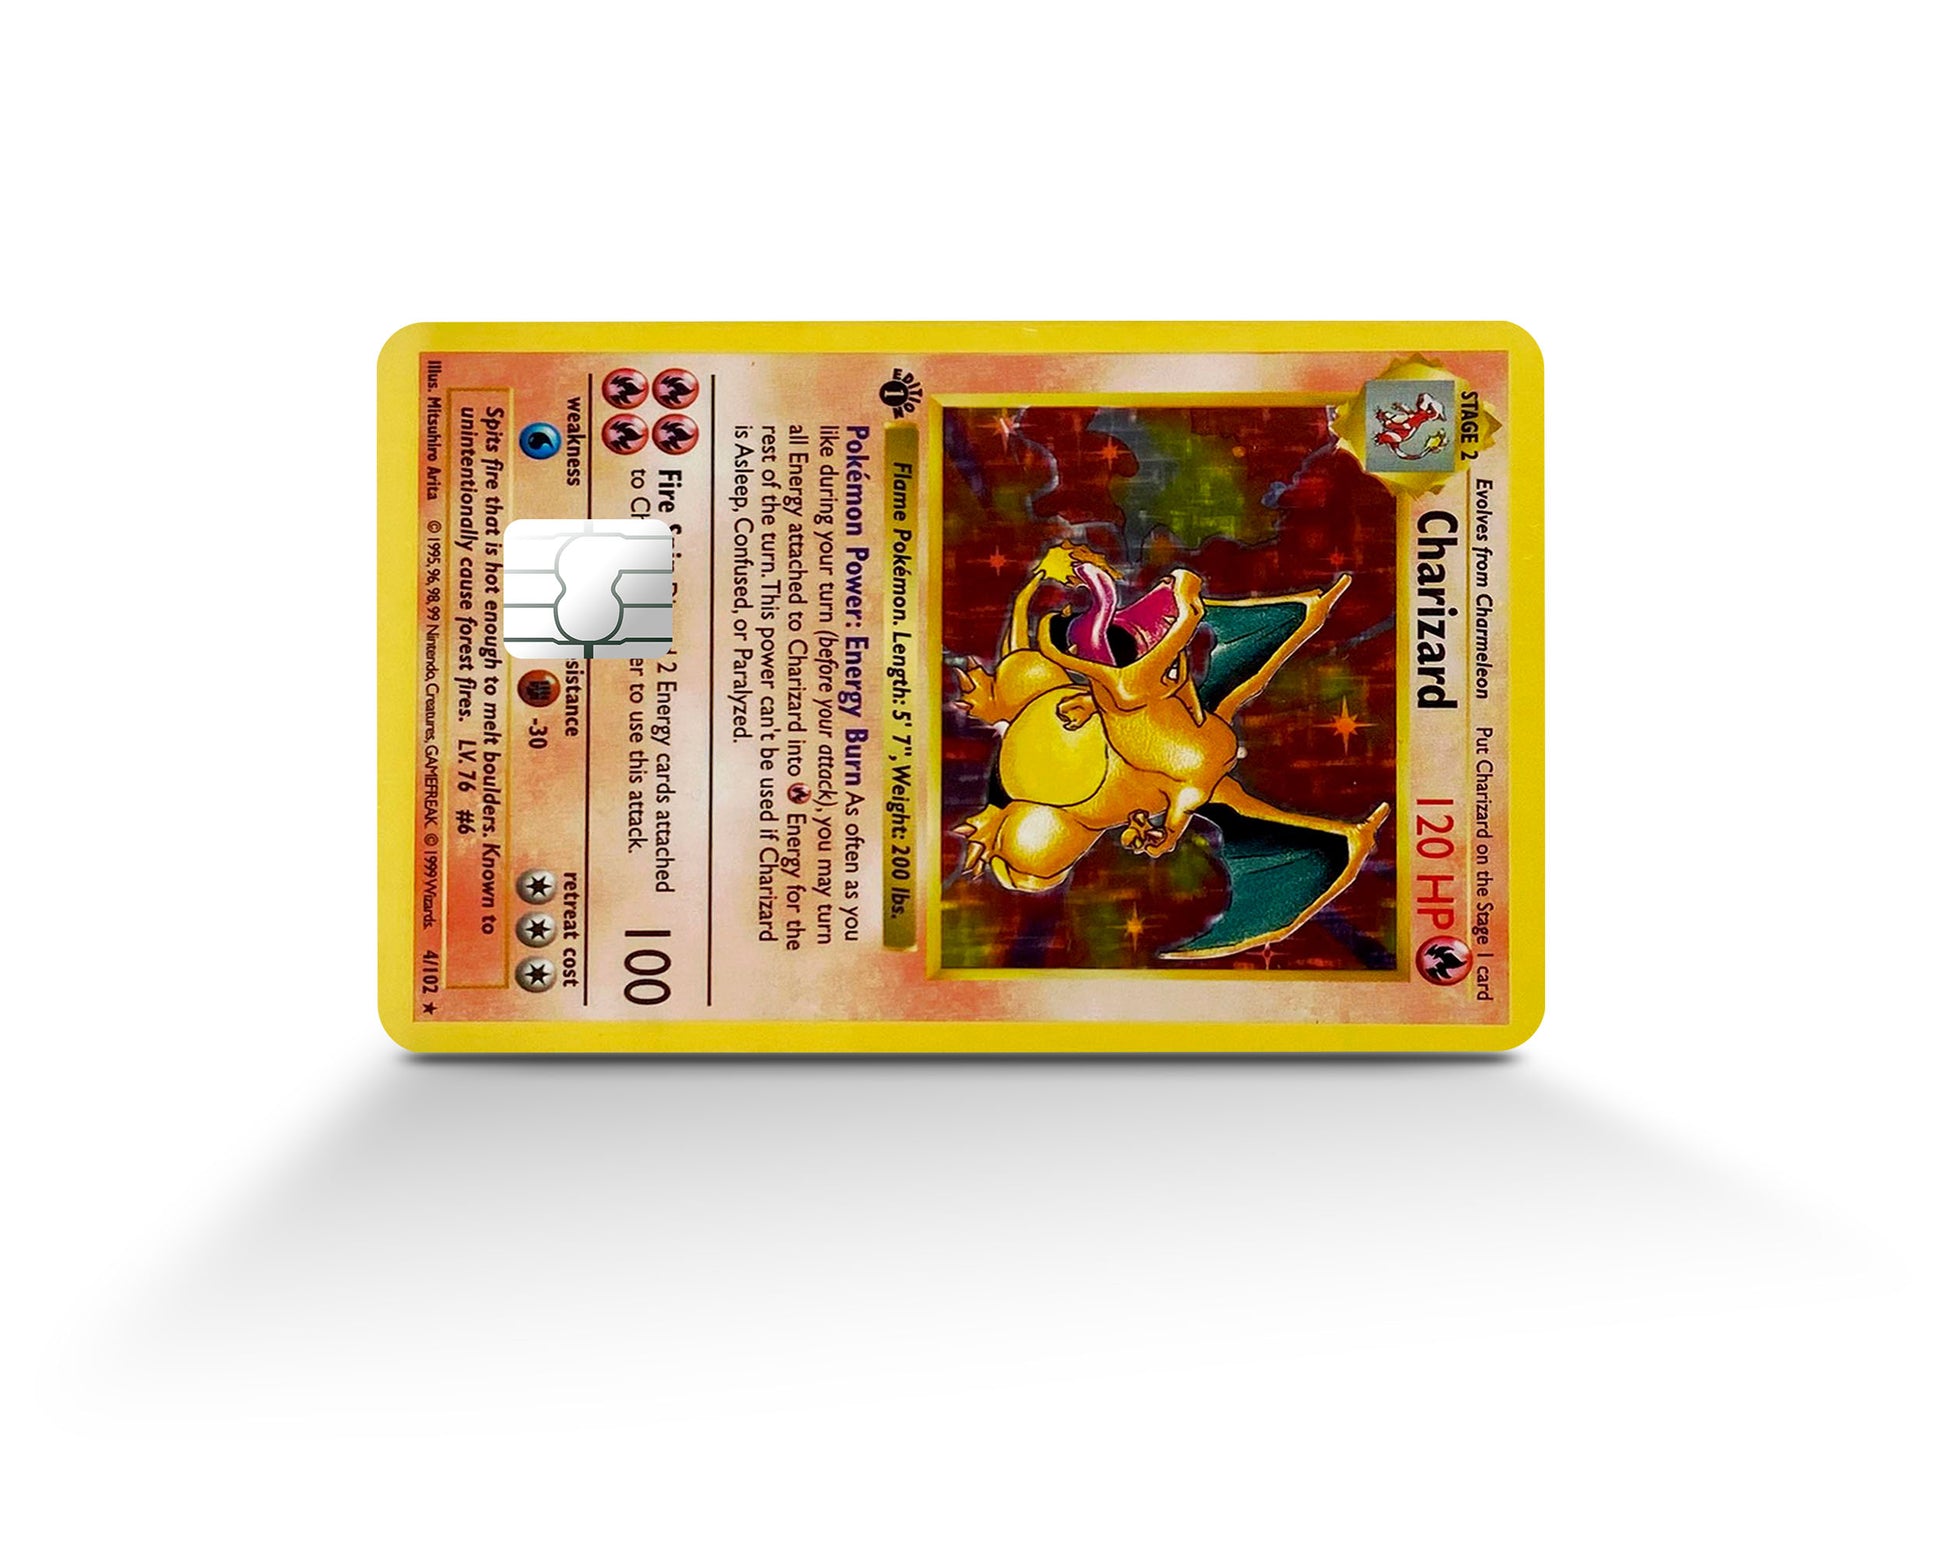 Charizard Pokémon Cards for Sales, Ships to Canada & US